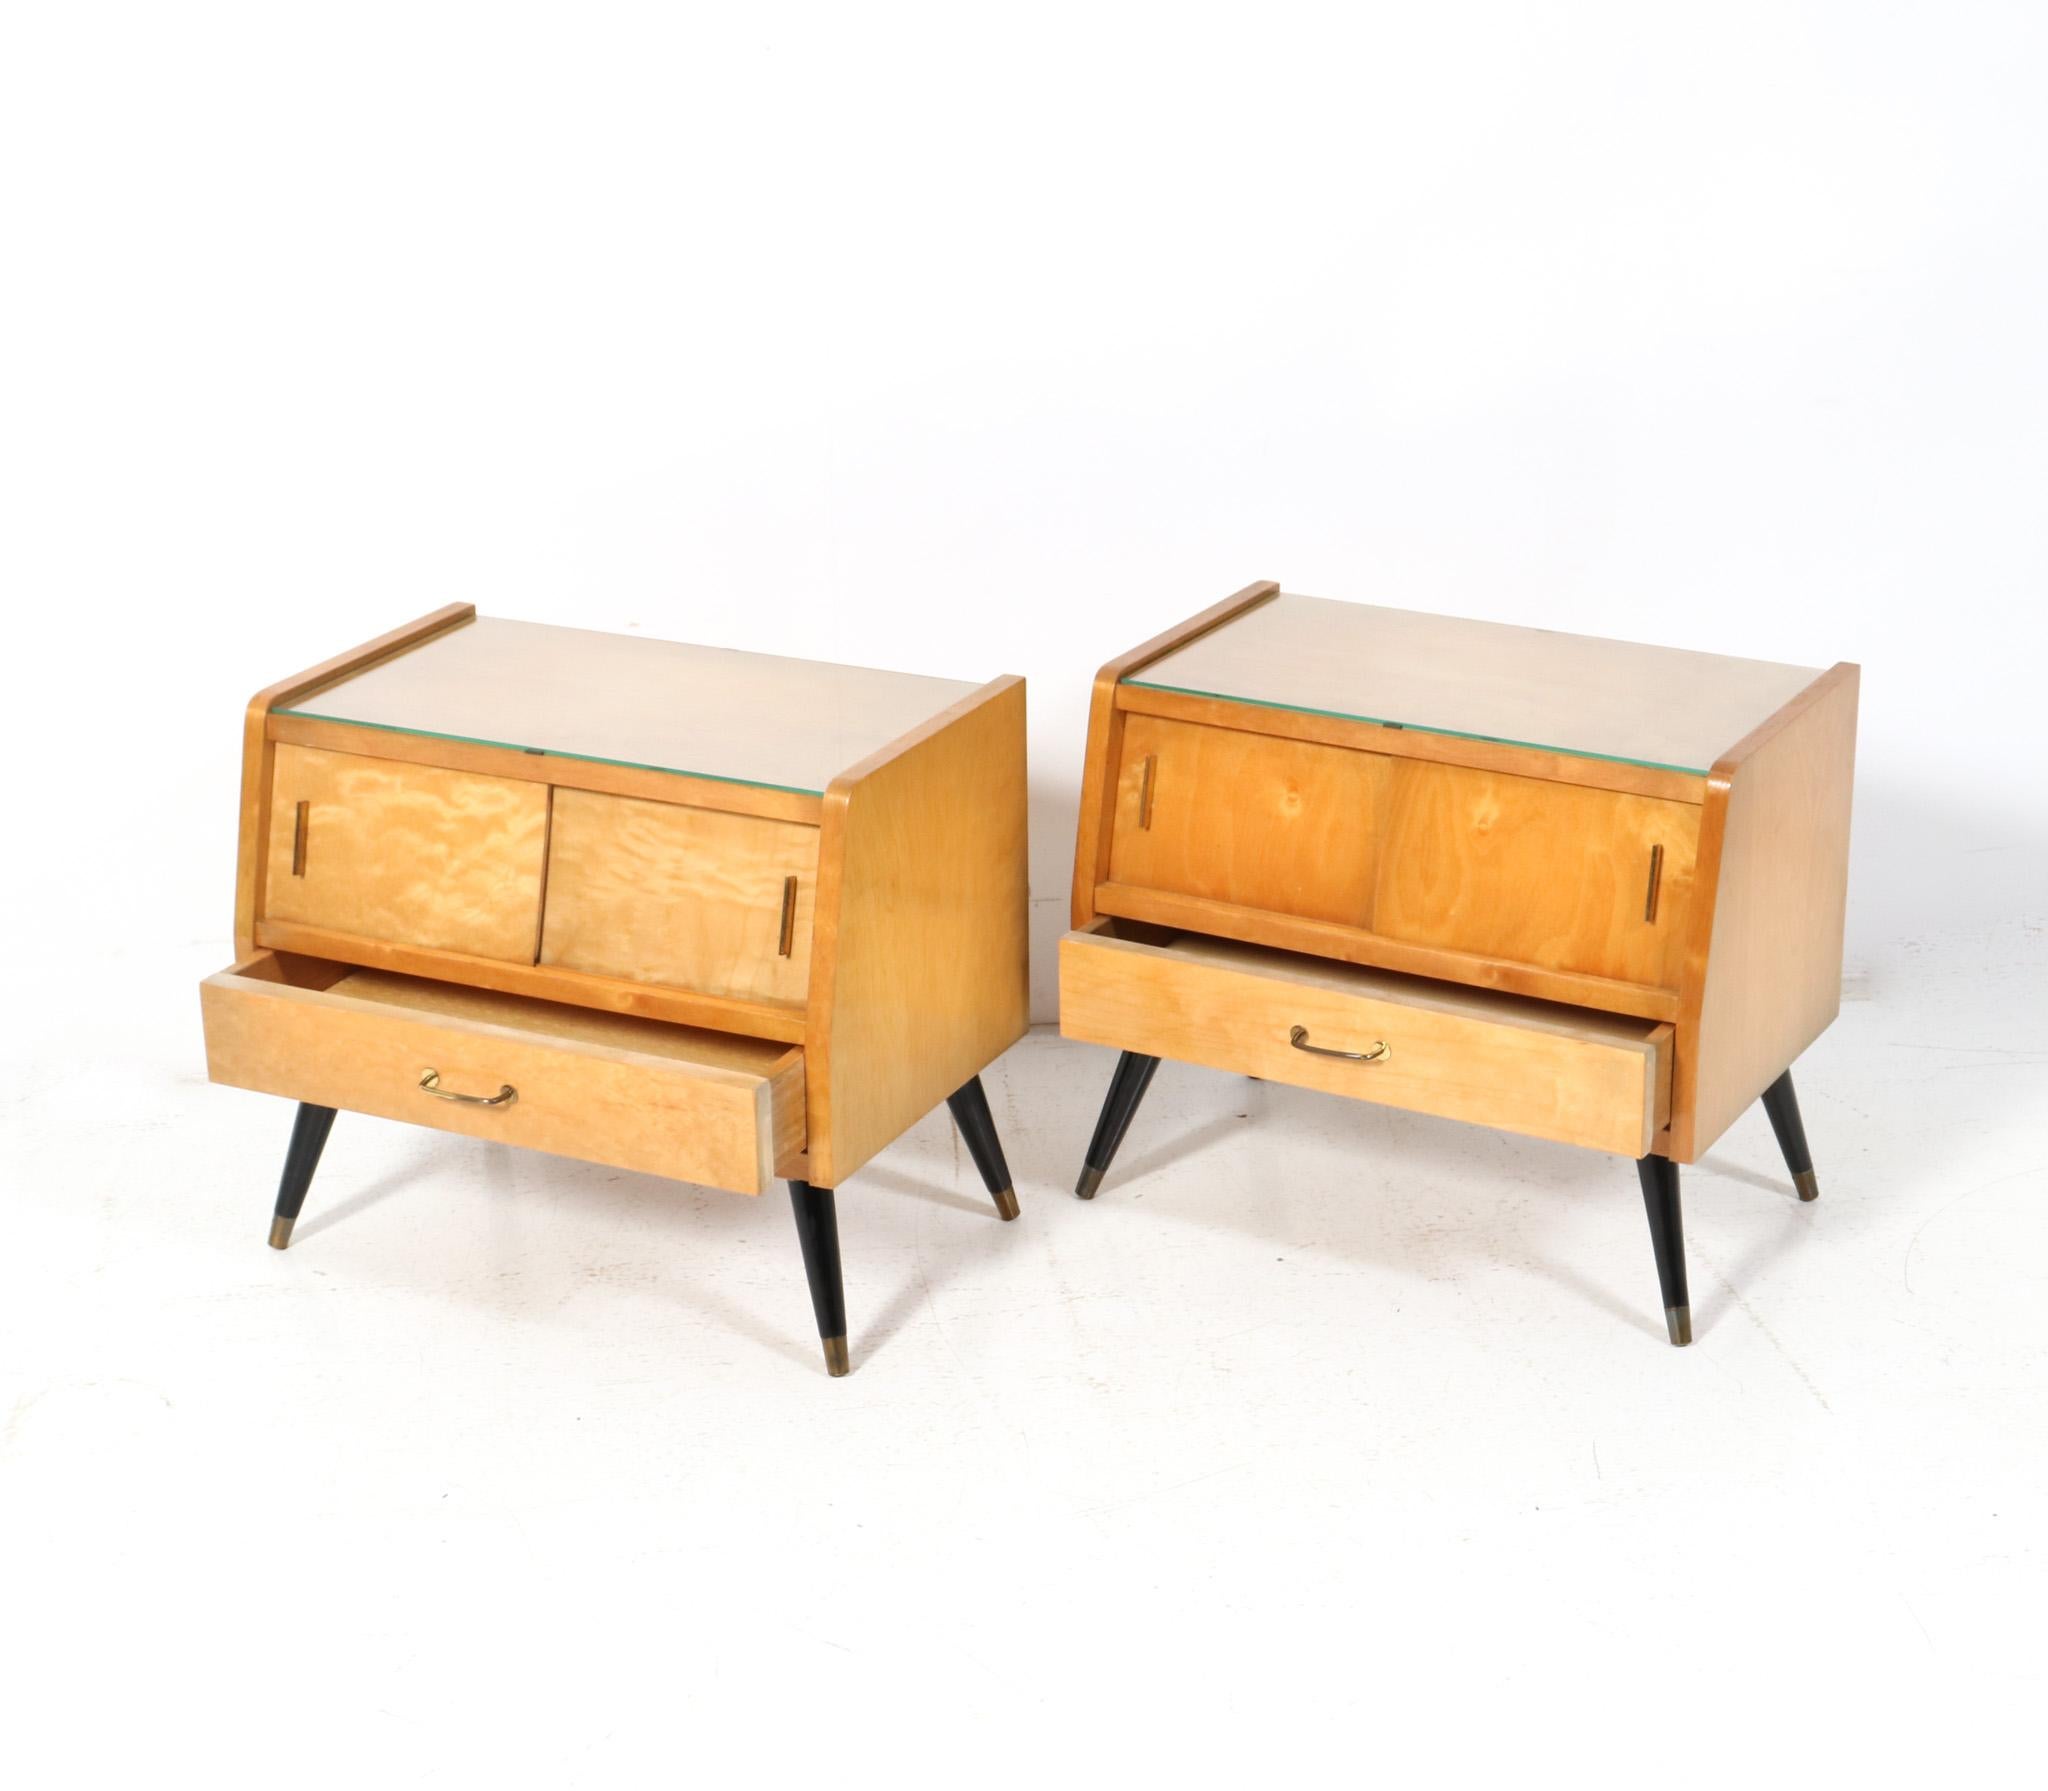  Mid-Century Modern Italian Nightstands or Bedside Tables, 1960s In Good Condition For Sale In Amsterdam, NL